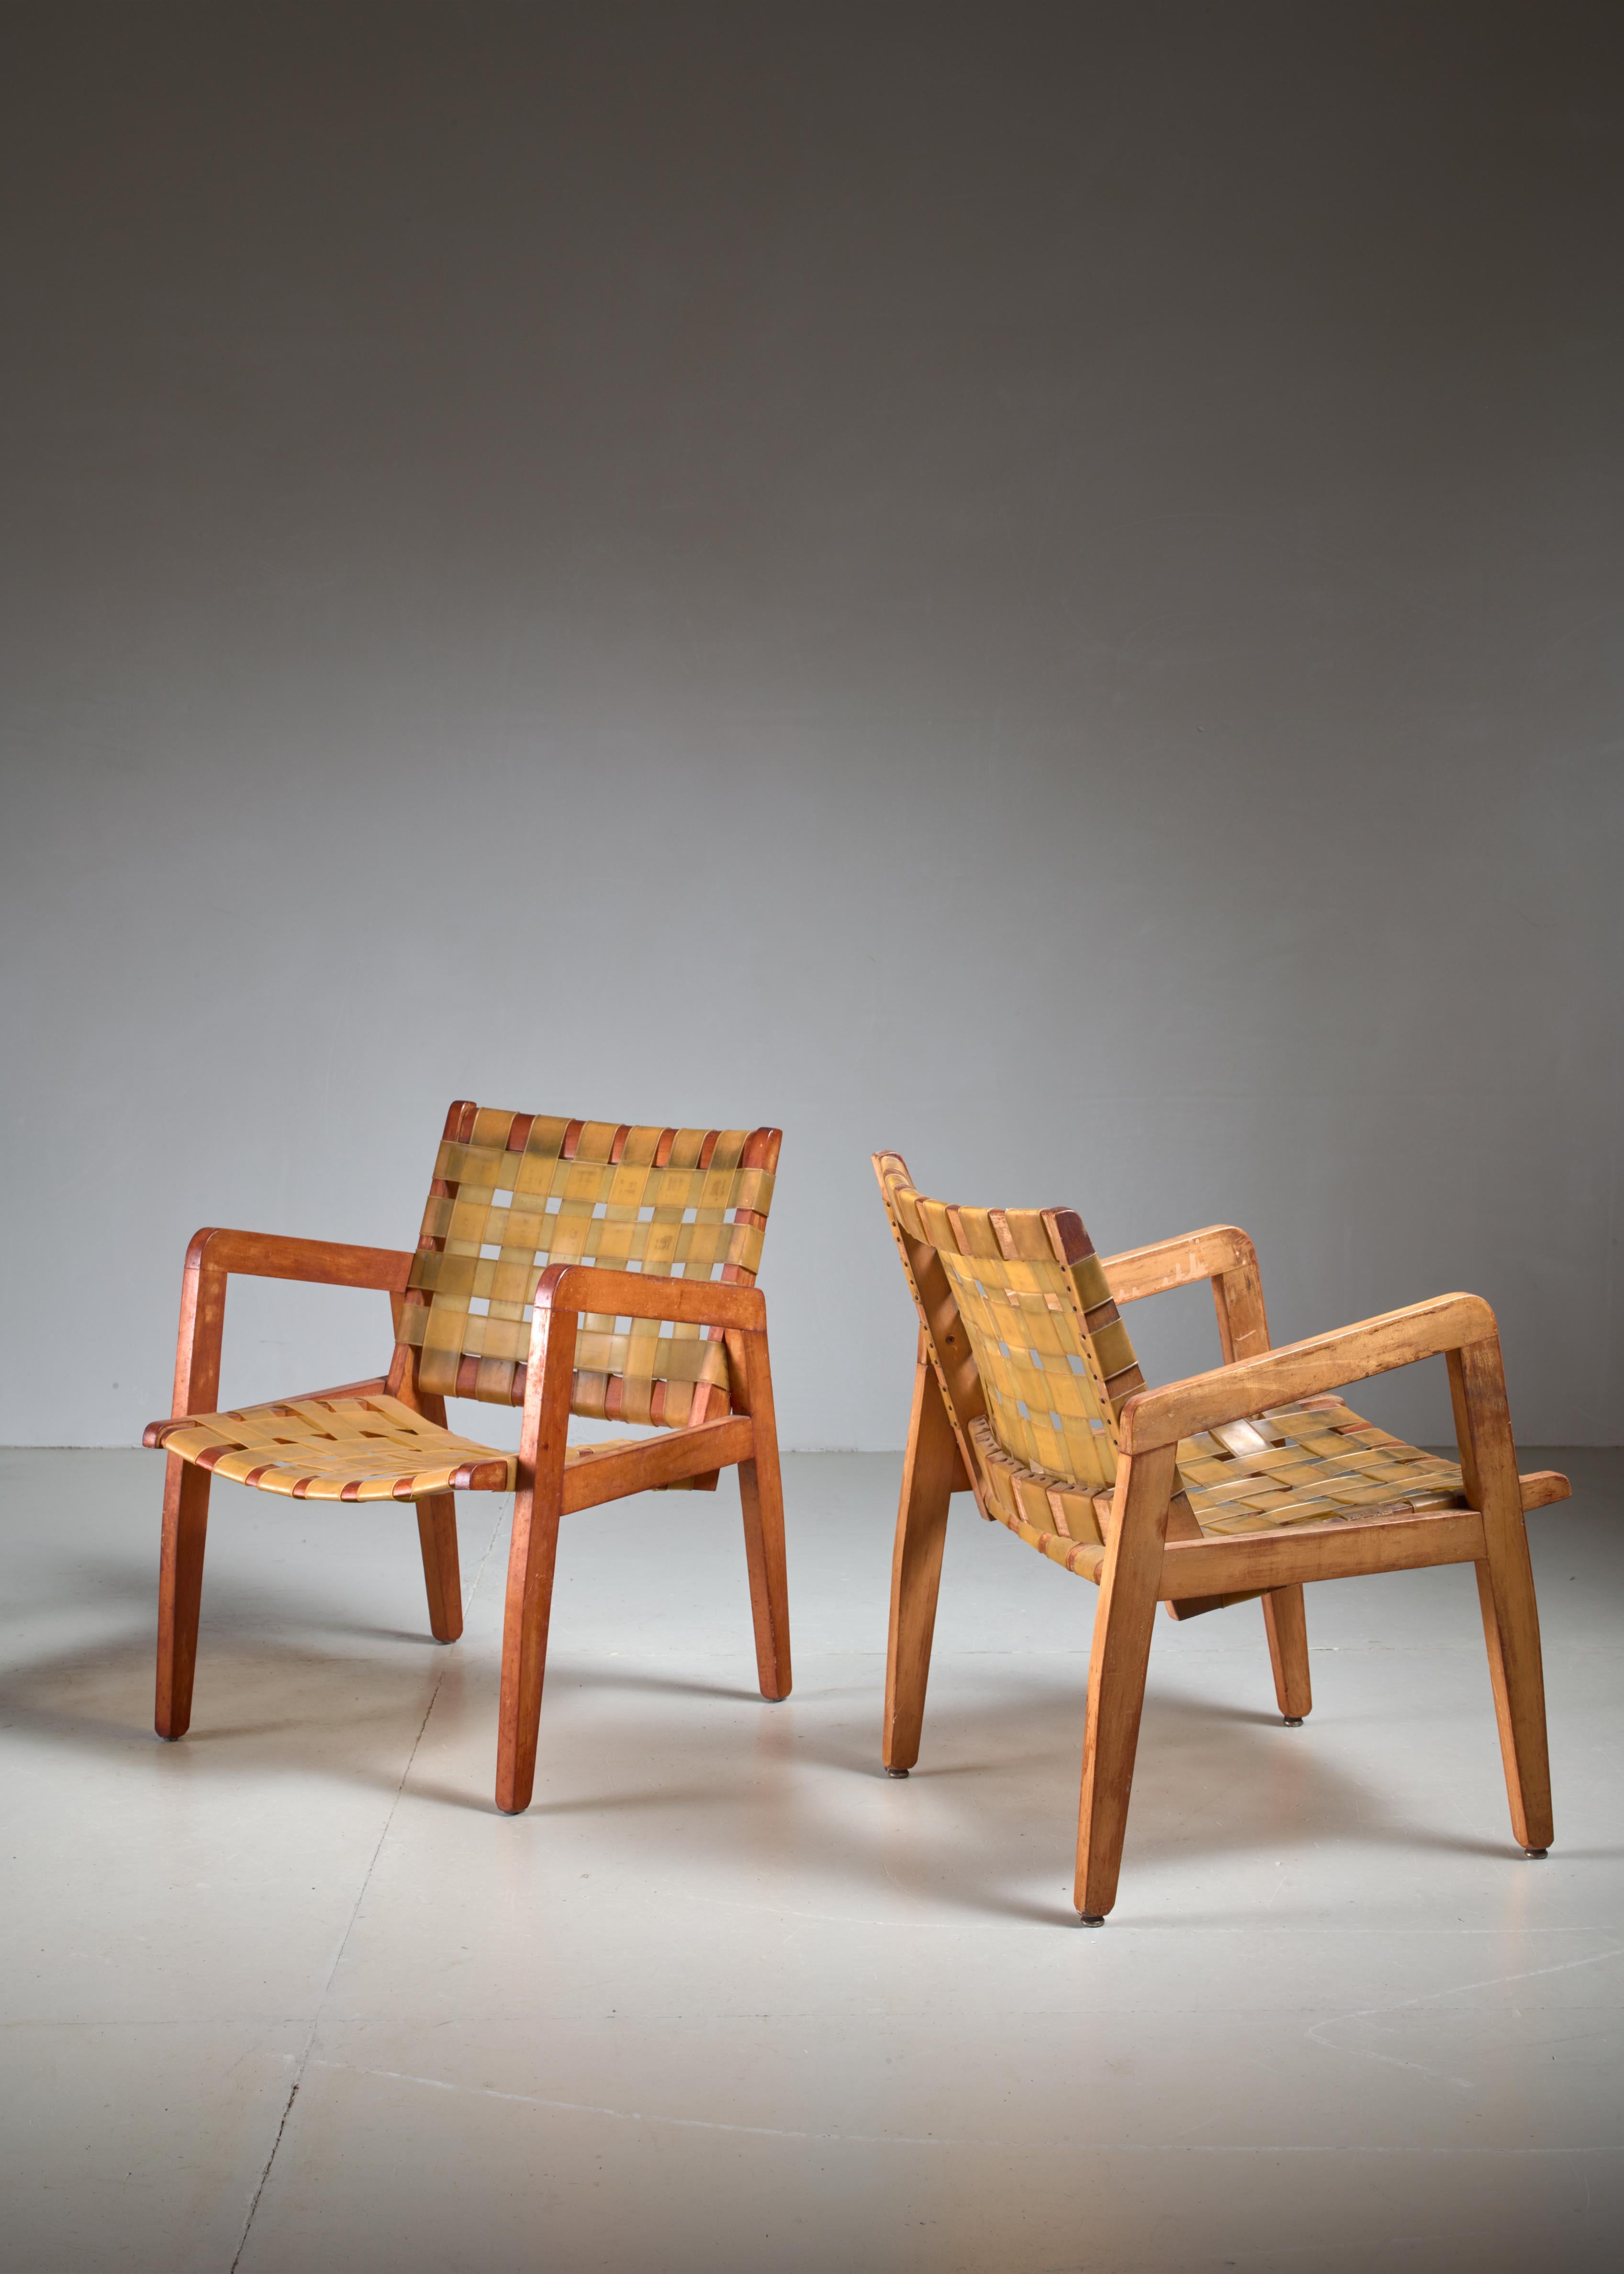 A pair of armchairs by the Beauchemin Brothers. The chairs are made of wood and a yellow plastic webbing. The chairs are in a very good vintage condition and fully original.

One of the chairs is marked 'Beauchemin Bros.'
The company was founded